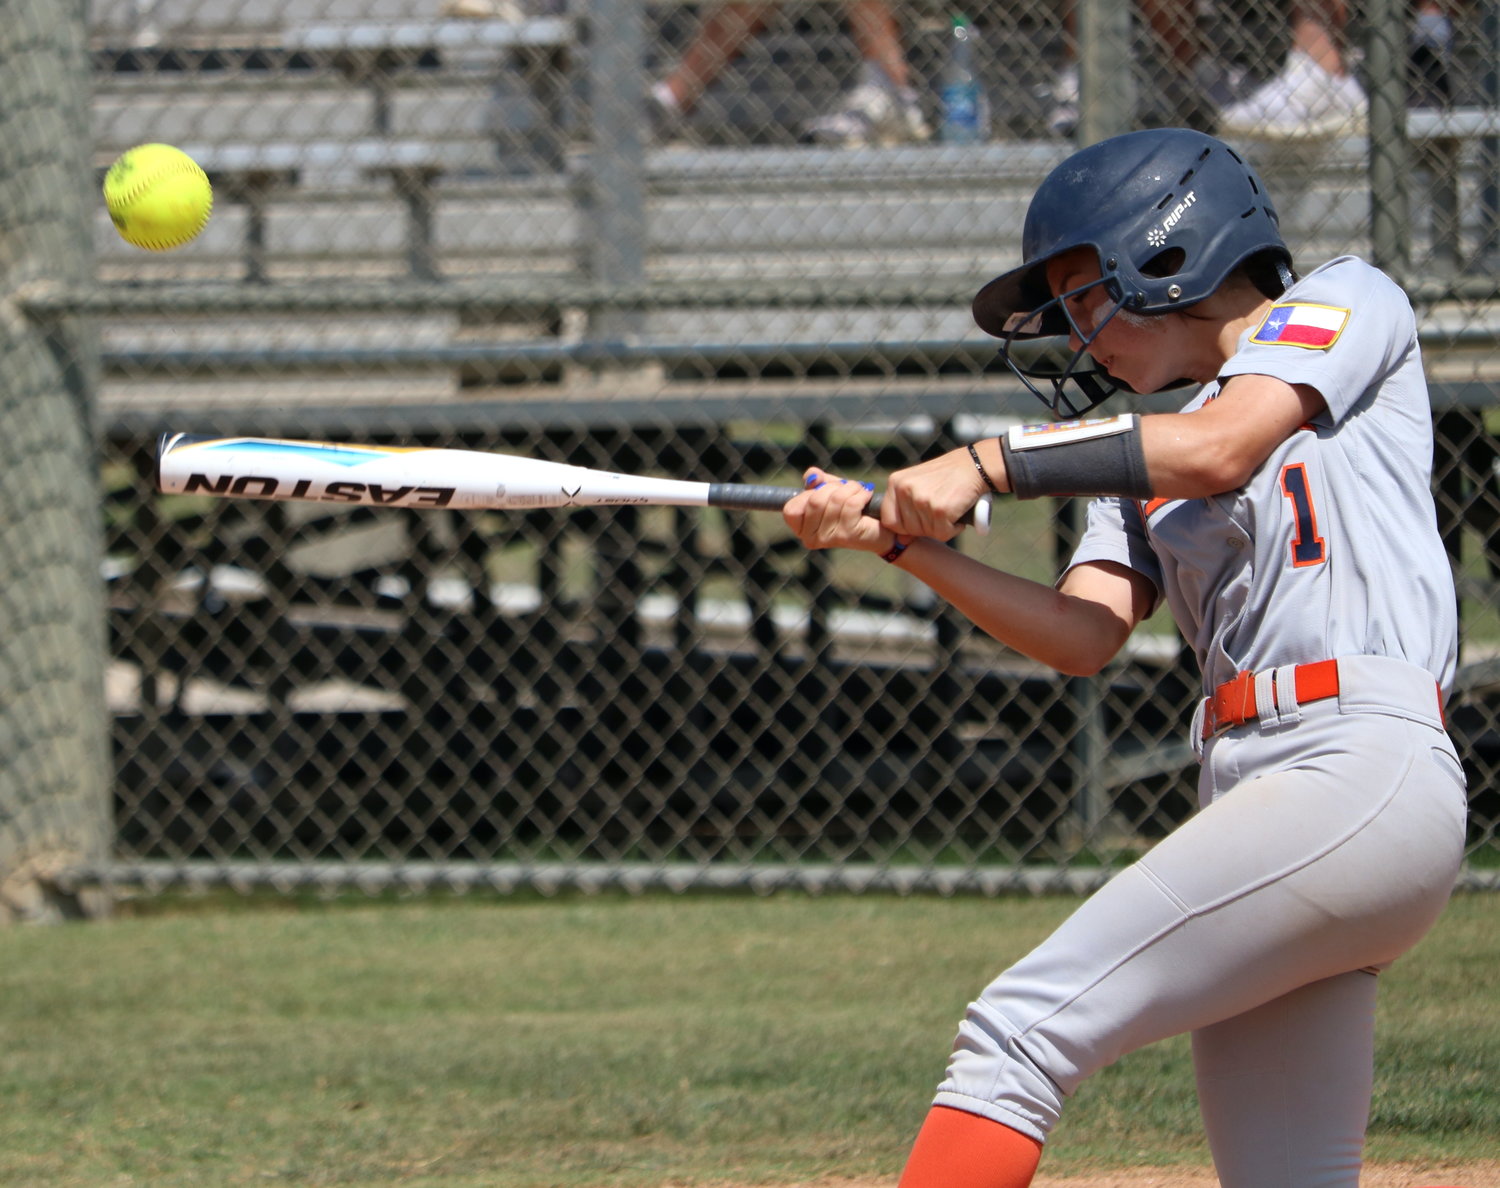 Kamryn Wallman hits during Saturday’s Class 6A Regional Quarterfinal game between Seven Lakes and George Ranch at the George Ranch softball field.